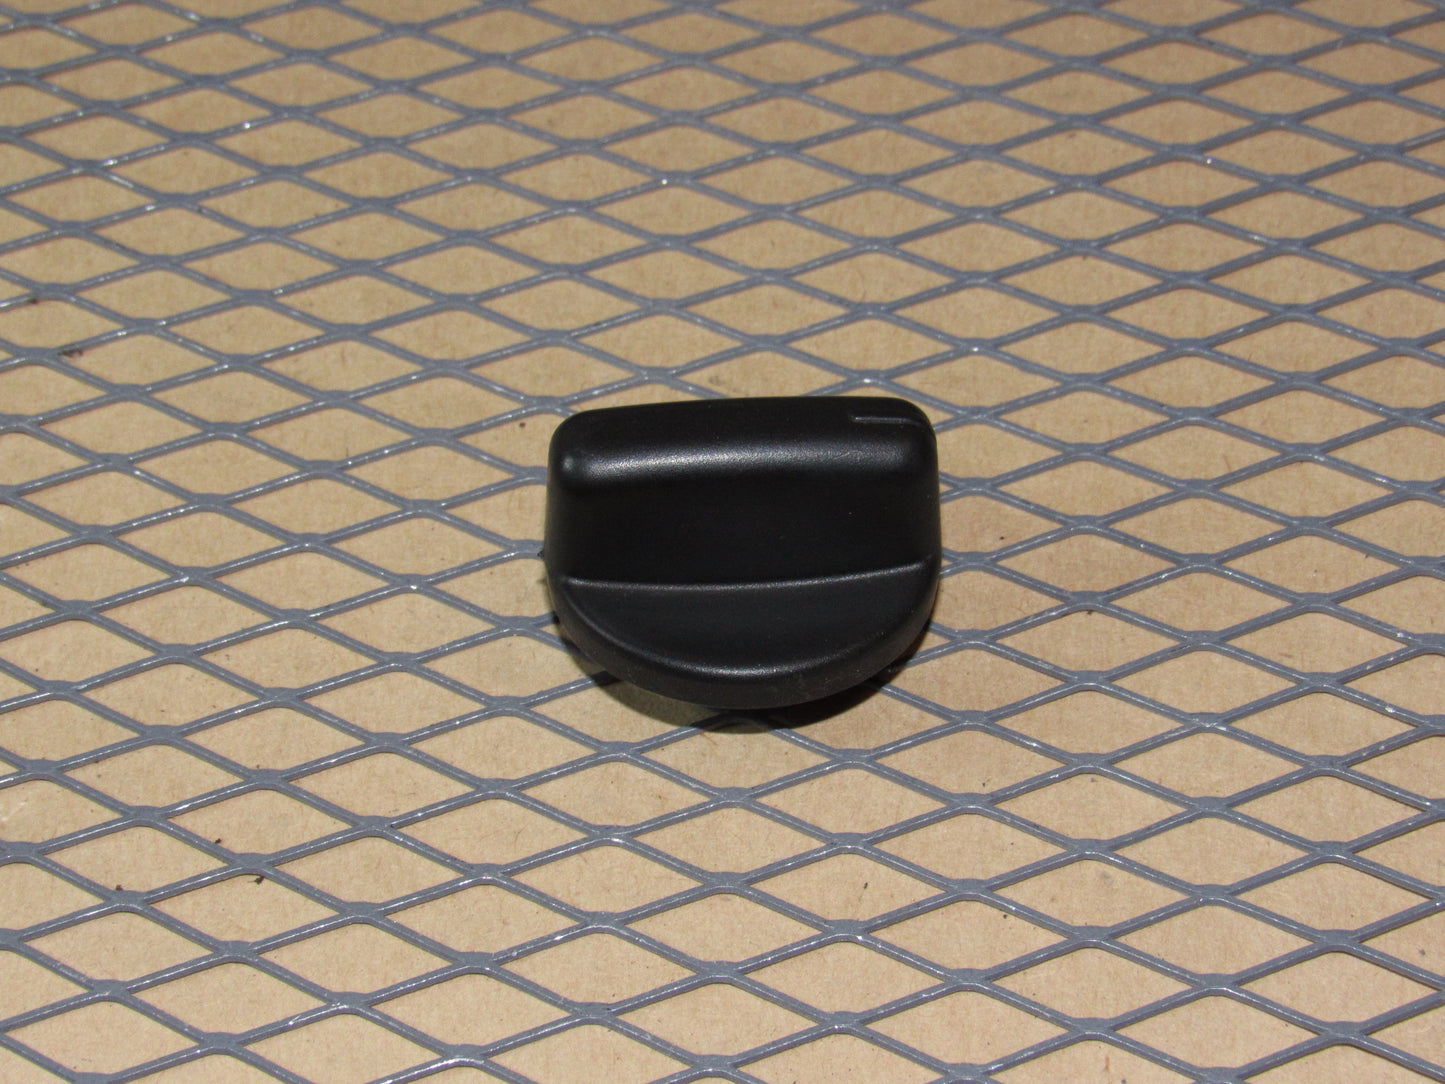 01 02 03 04 05 06 07 Ford Escape OEM 4x4 Auto On Switch Knob